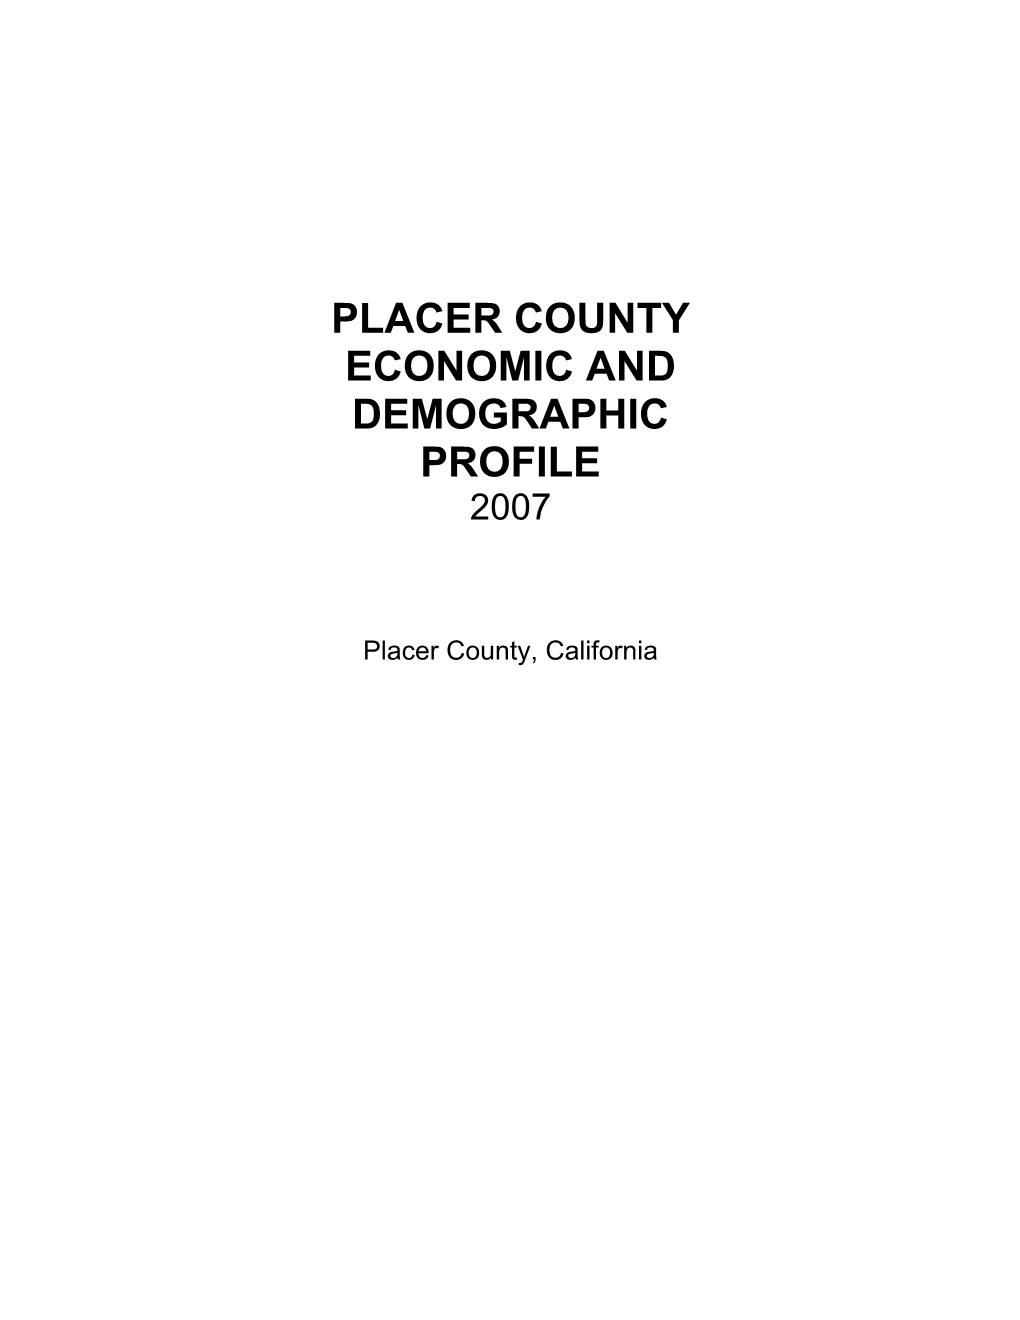 Placer County Economic and Demographic Profile 2007